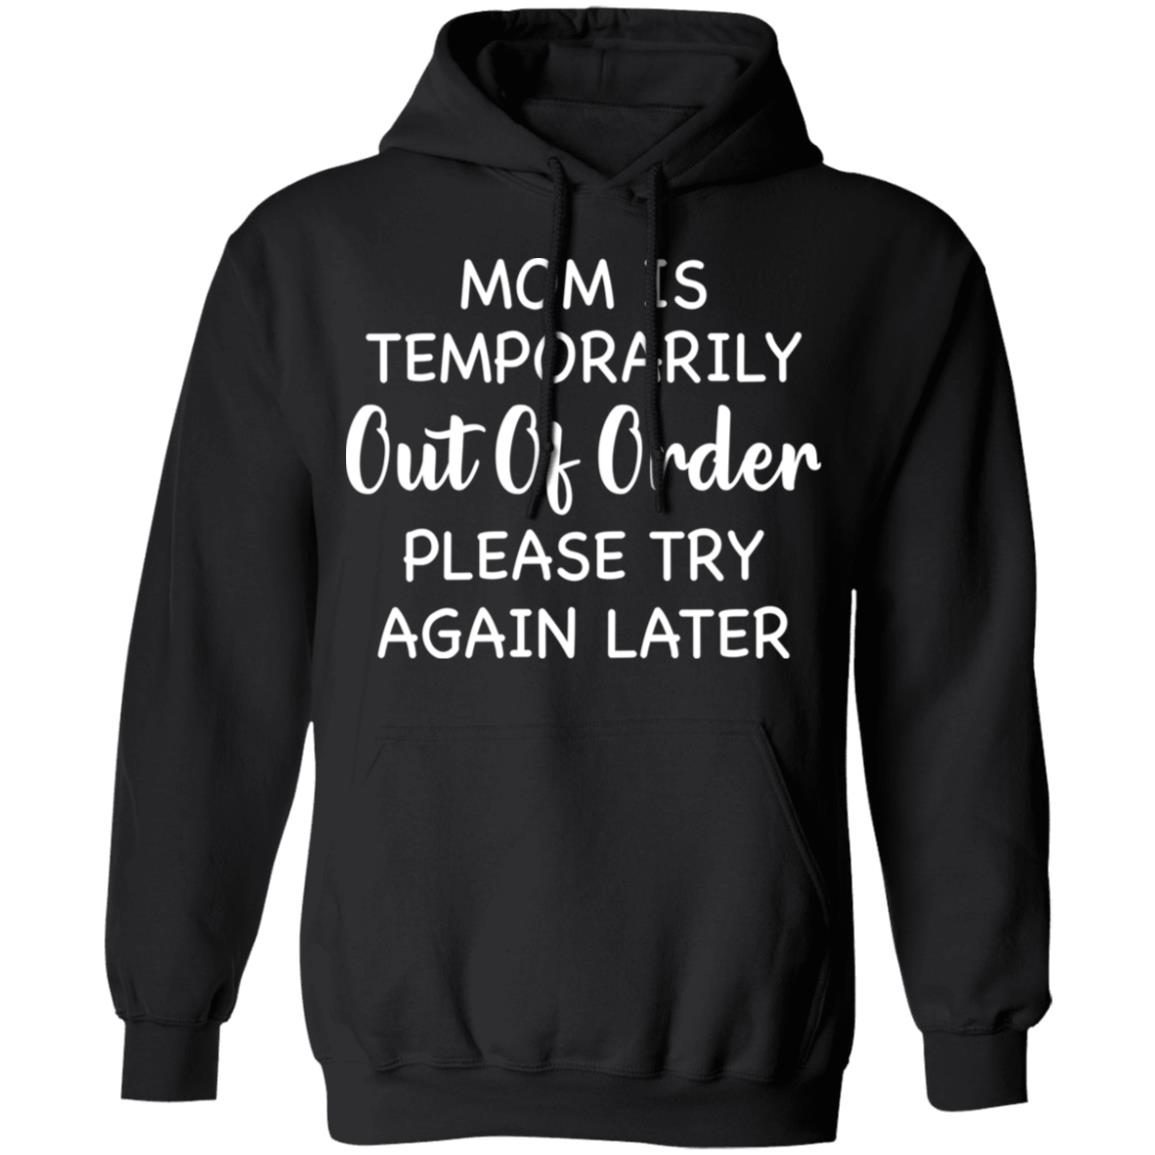 Mom is temporarily out of order please try again later shirt 5